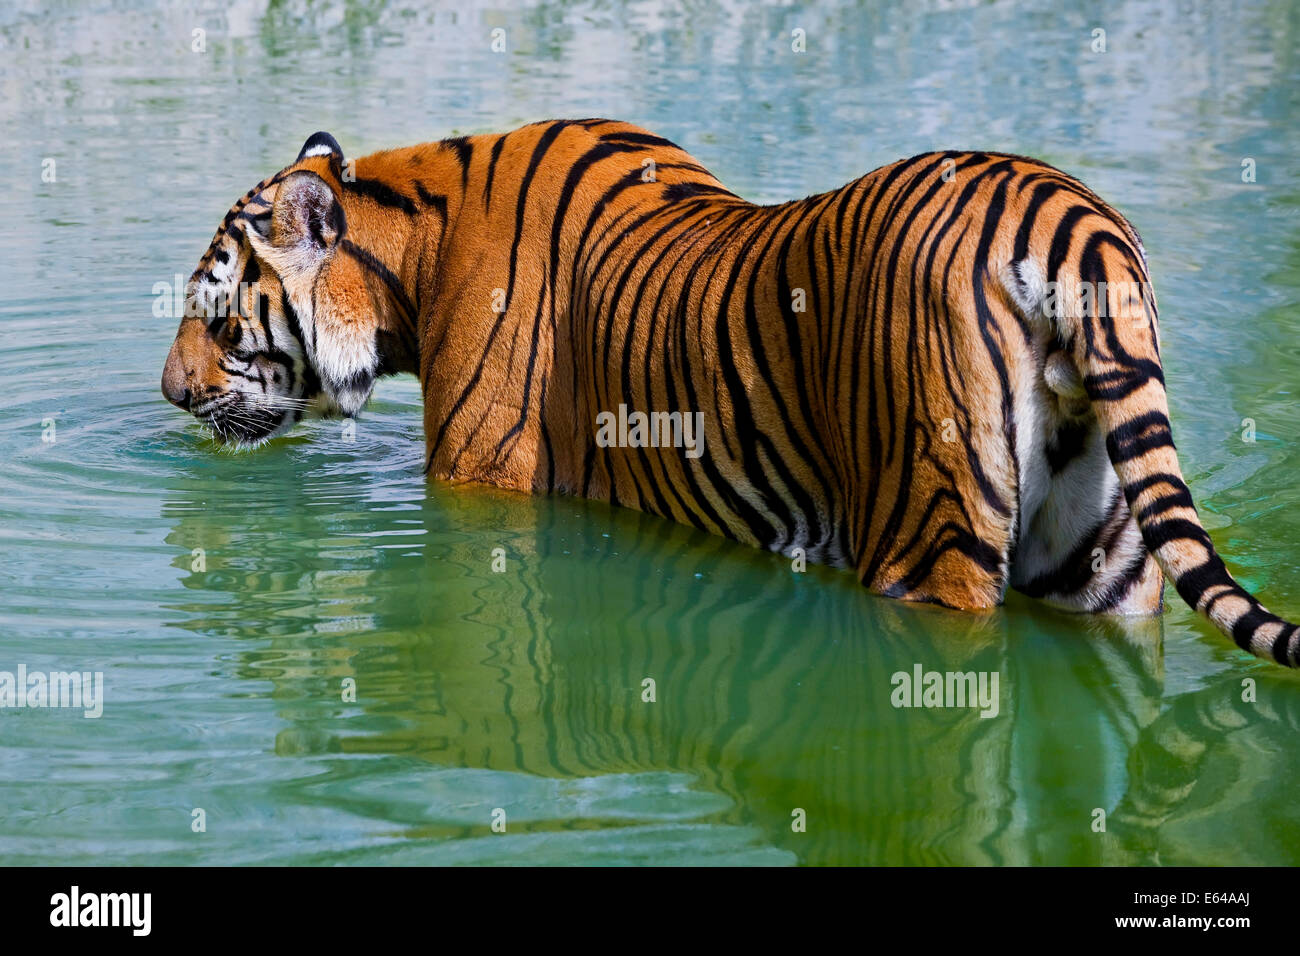 Tigers in water, Indochinese tiger or Corbett's tiger (Panthera tigris corbetti), Thailand Stock Photo